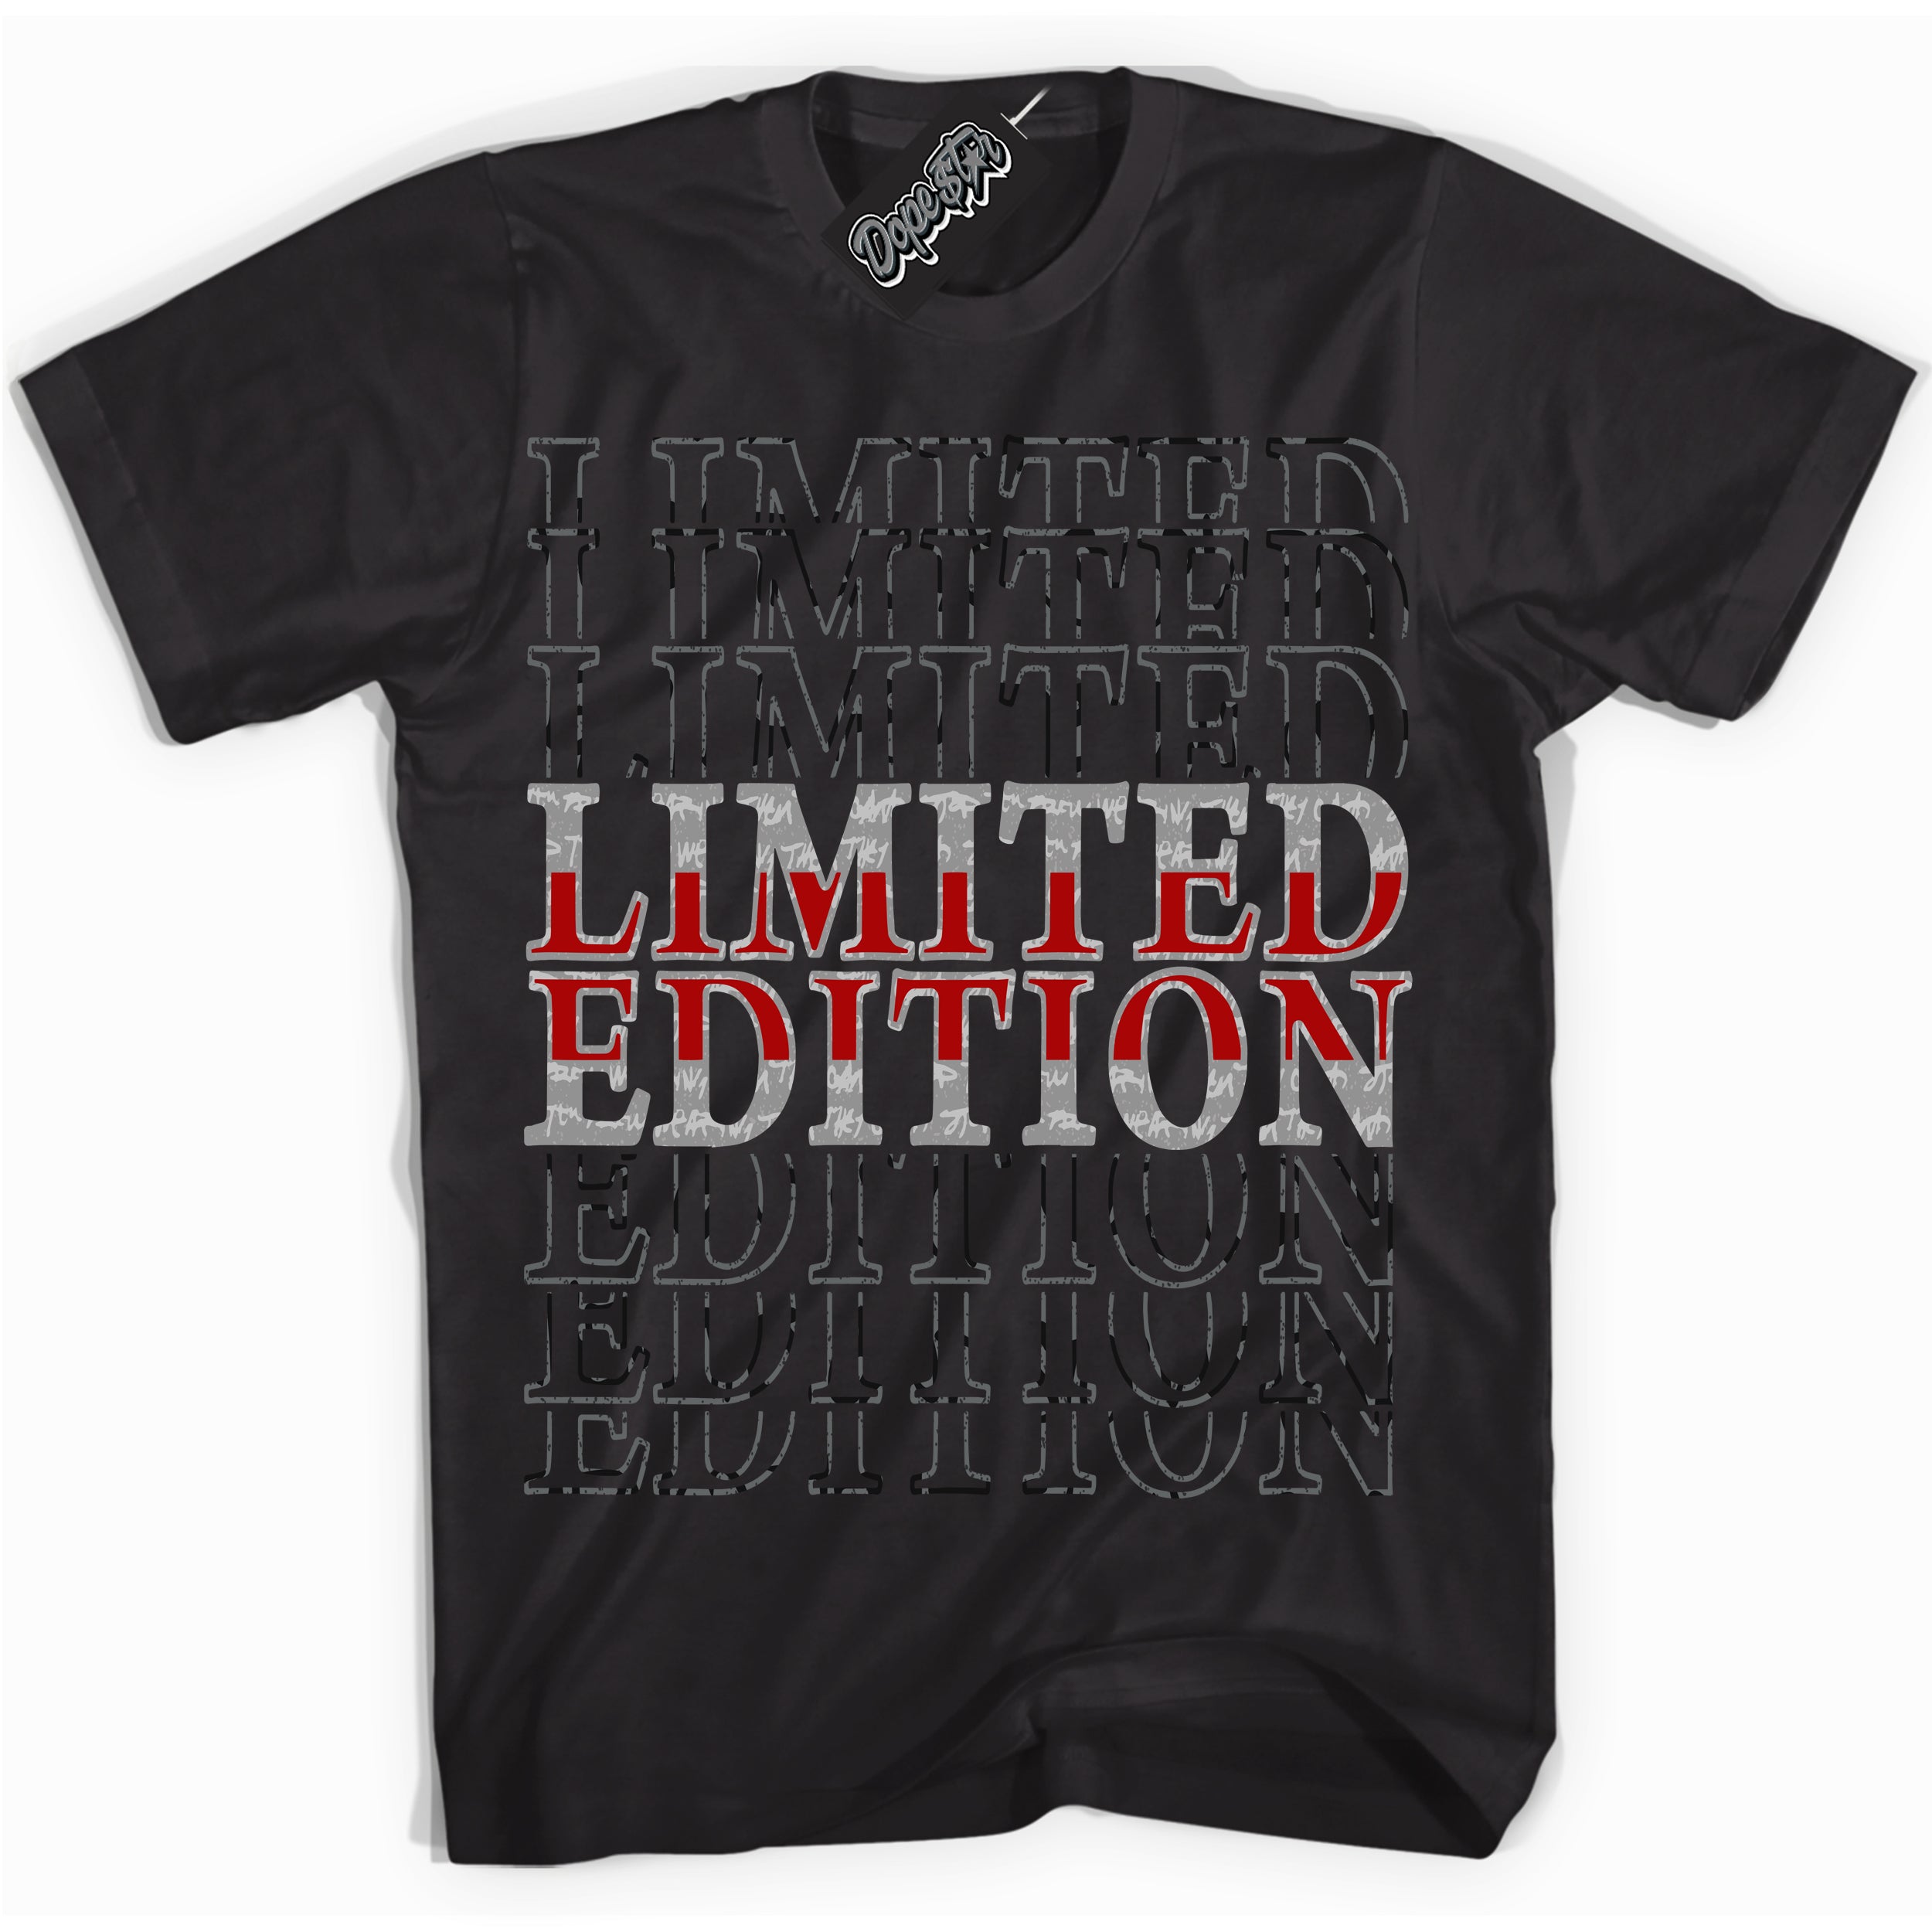 Cool Black Shirt with “ Limited Edition ” design that perfectly matches Rebellionaire 1s Sneakers.